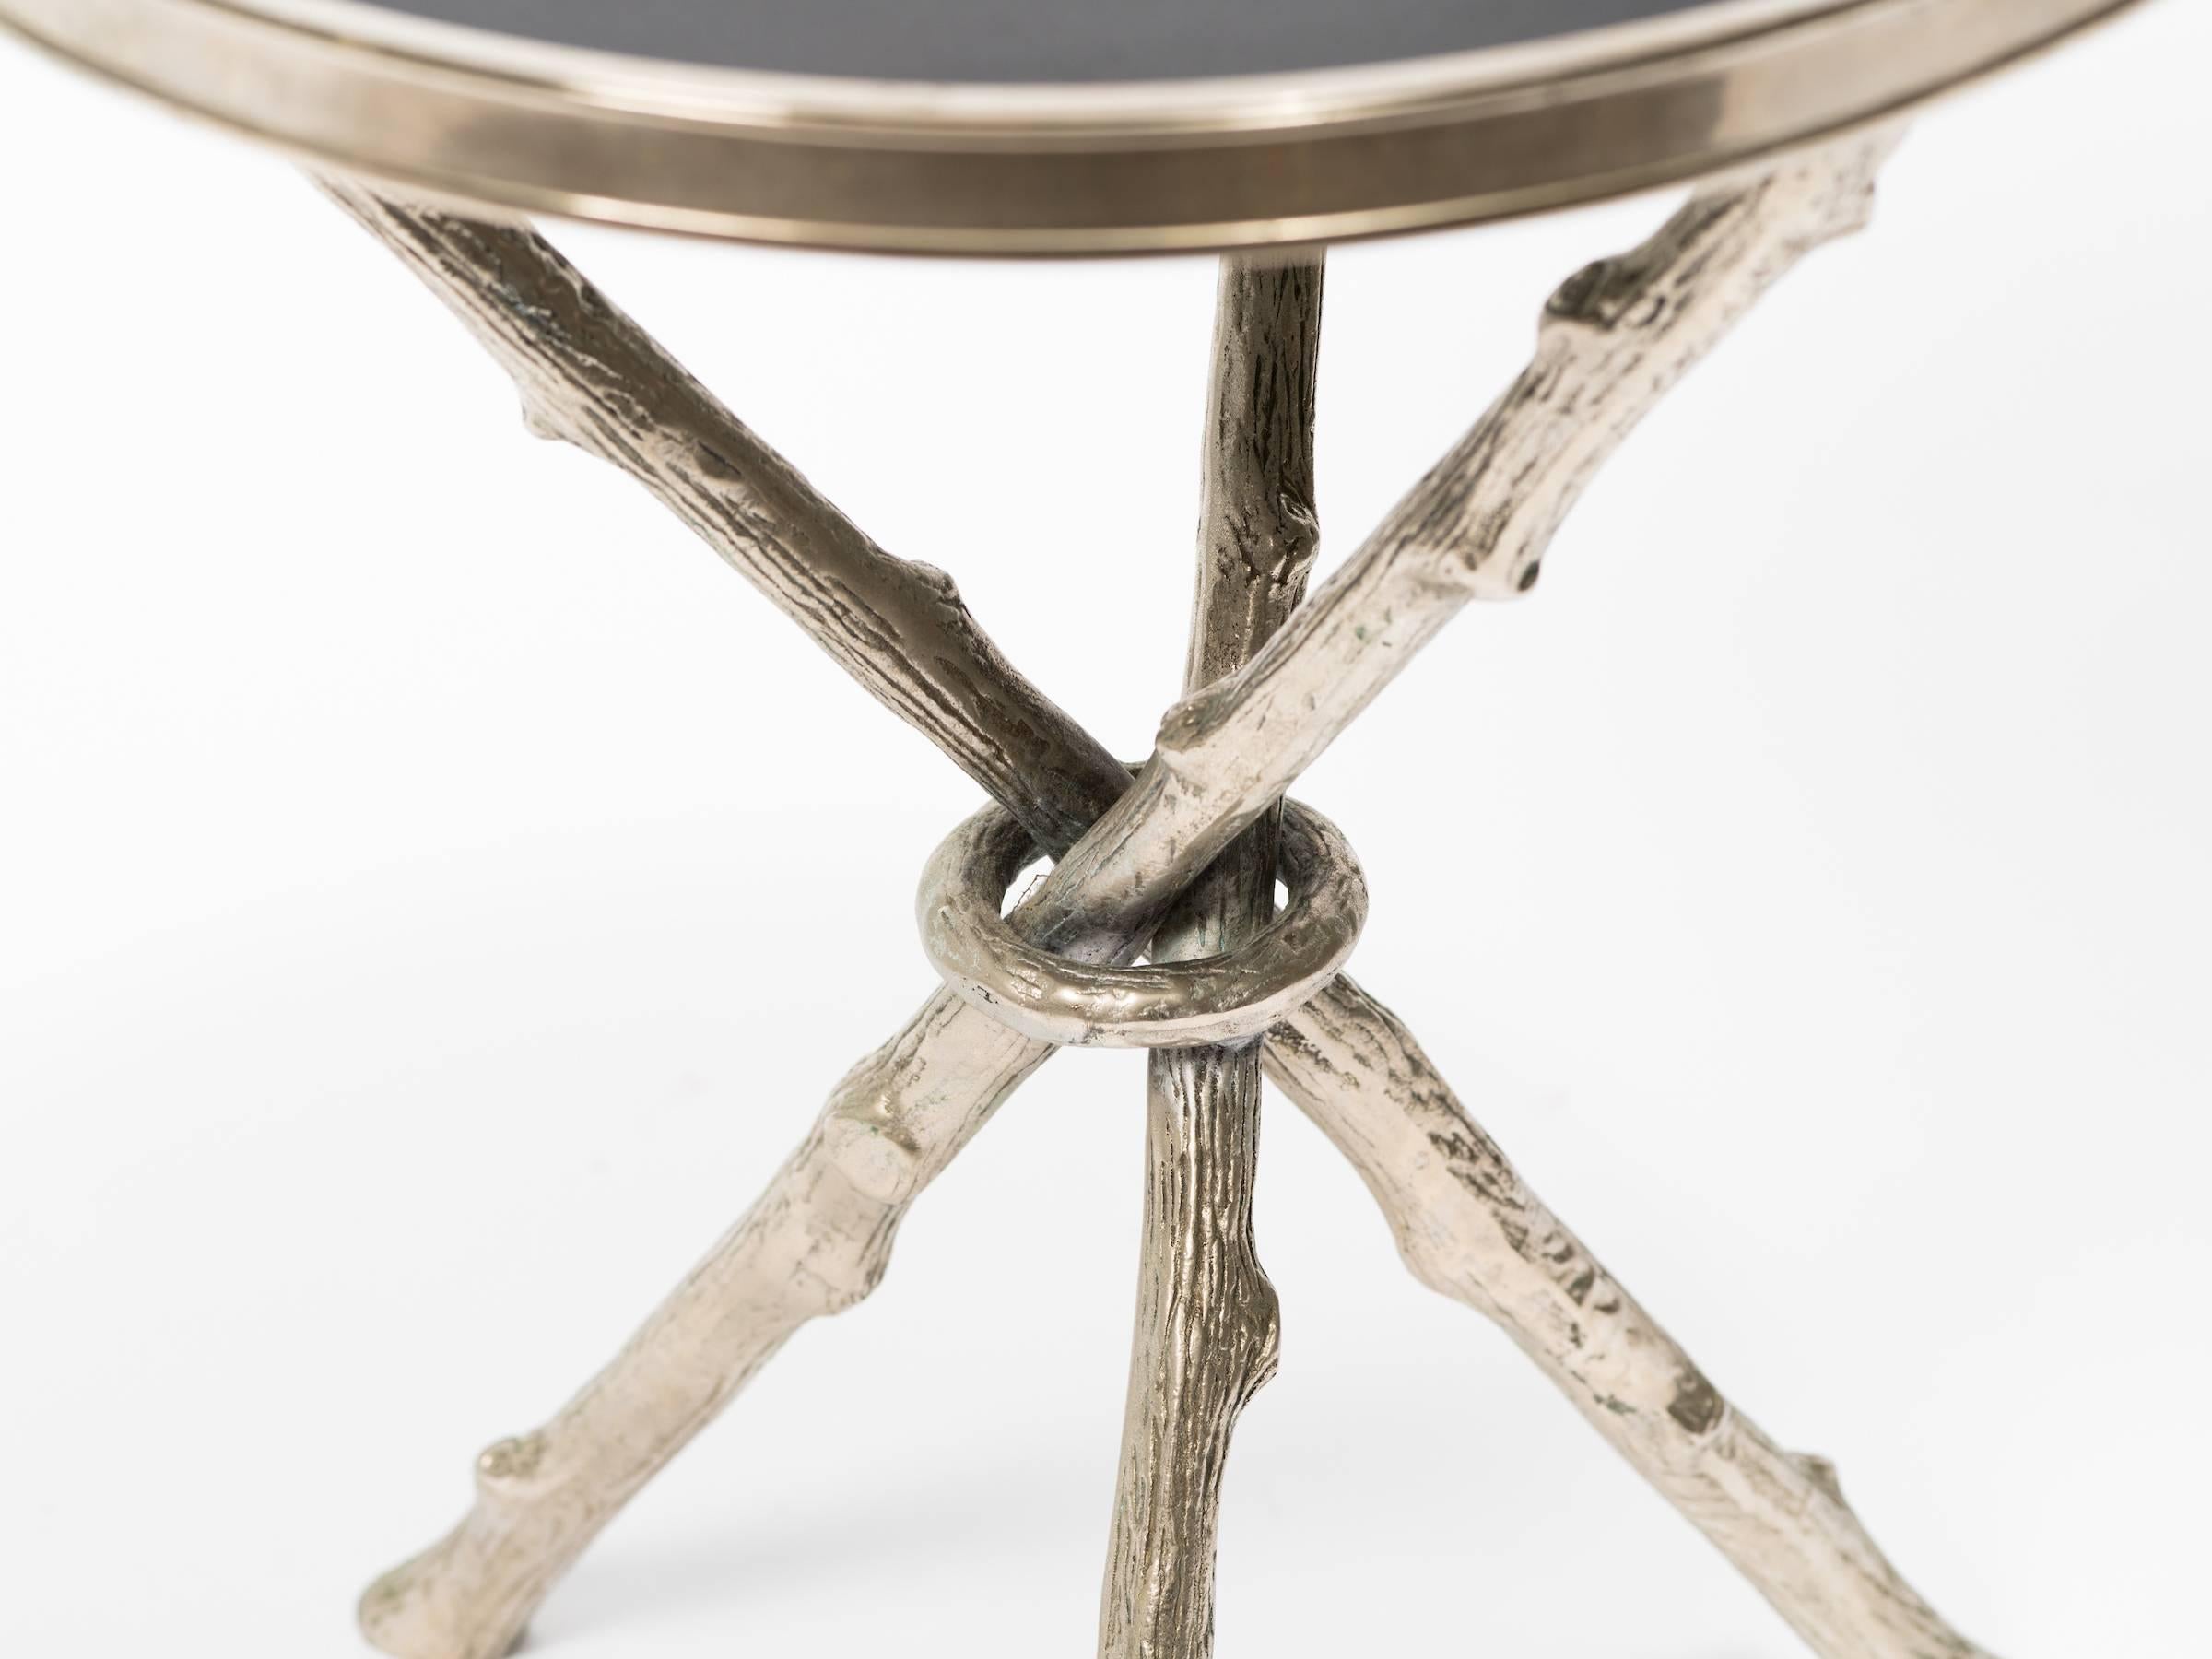 Contemporary Faux Bamboo Chrome and Granite Tripod Table